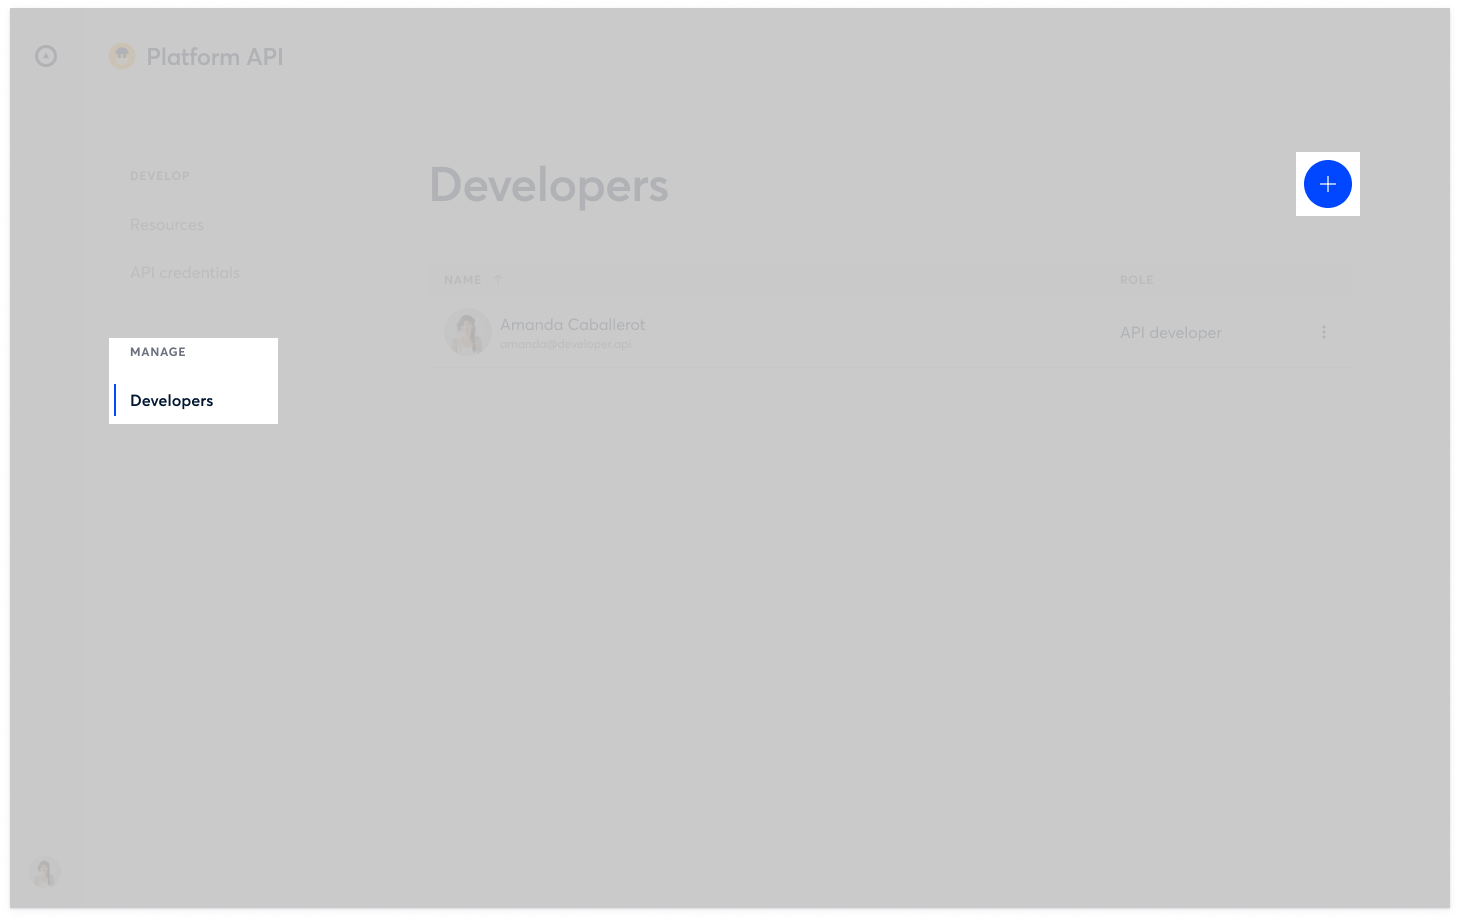 The Developers section is where admins can assign a developer role to existing users